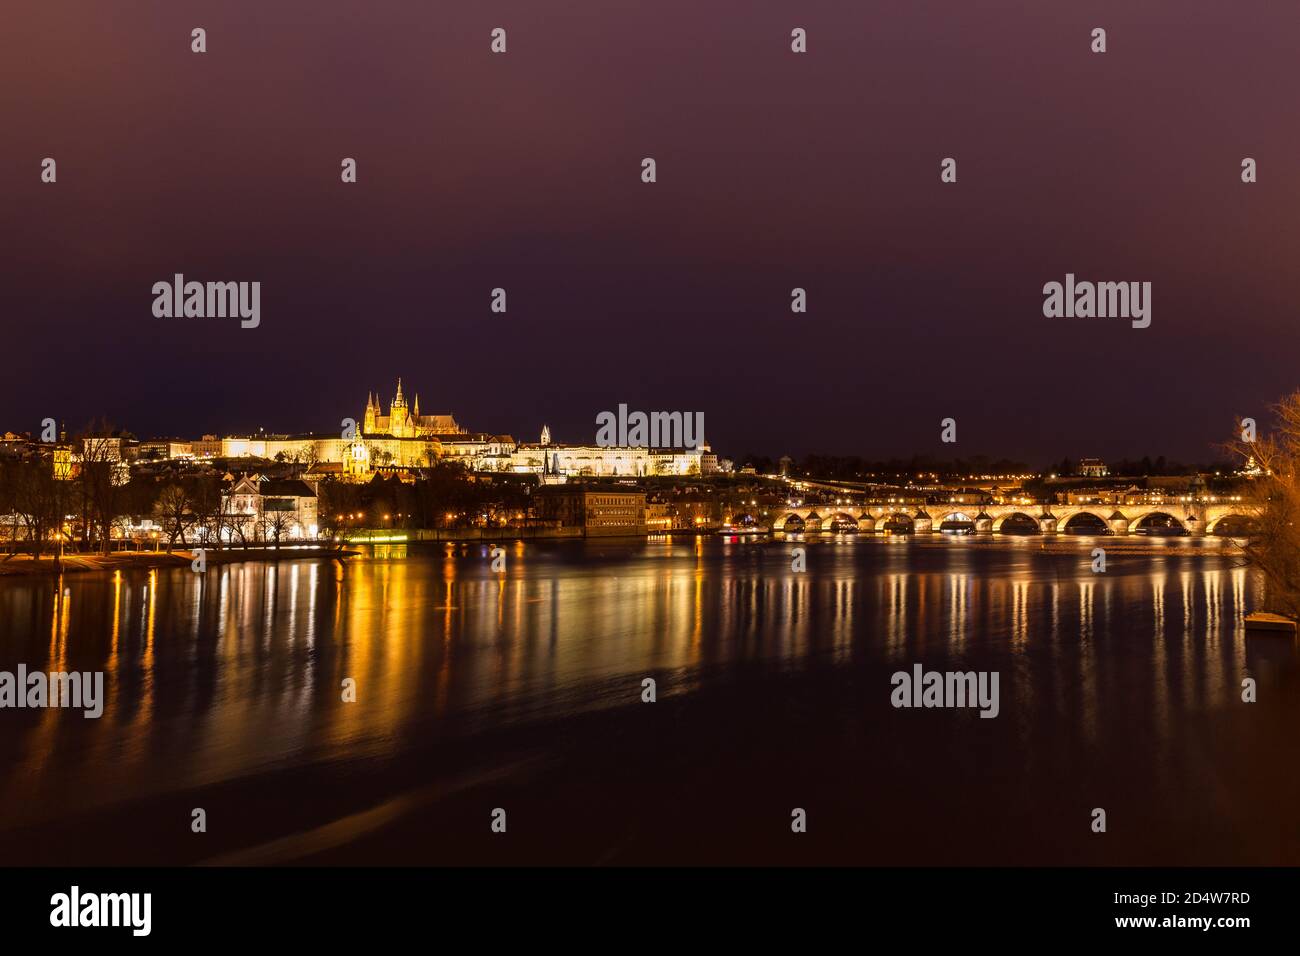 Panorama night view of the light illuminated Prague Castle and St. Vitus Cathedral with Charles Bridge over Vltava River and in the center of old town Stock Photo